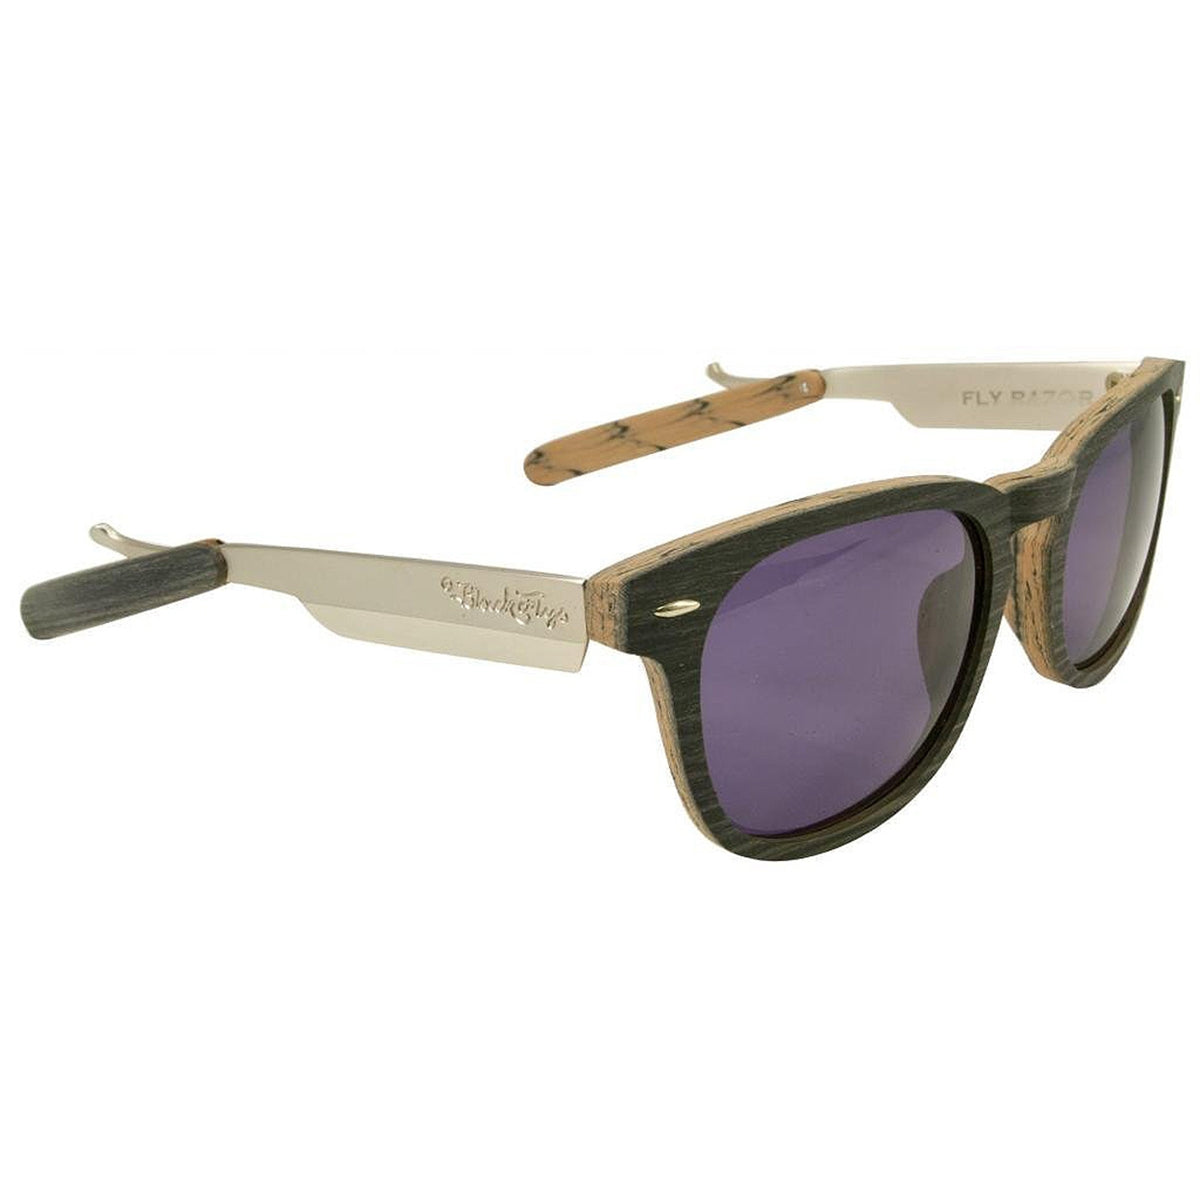 BLACK FLYS -  &quot;RAZOR&quot; Sunglasses By Double Cross in Brown Wood